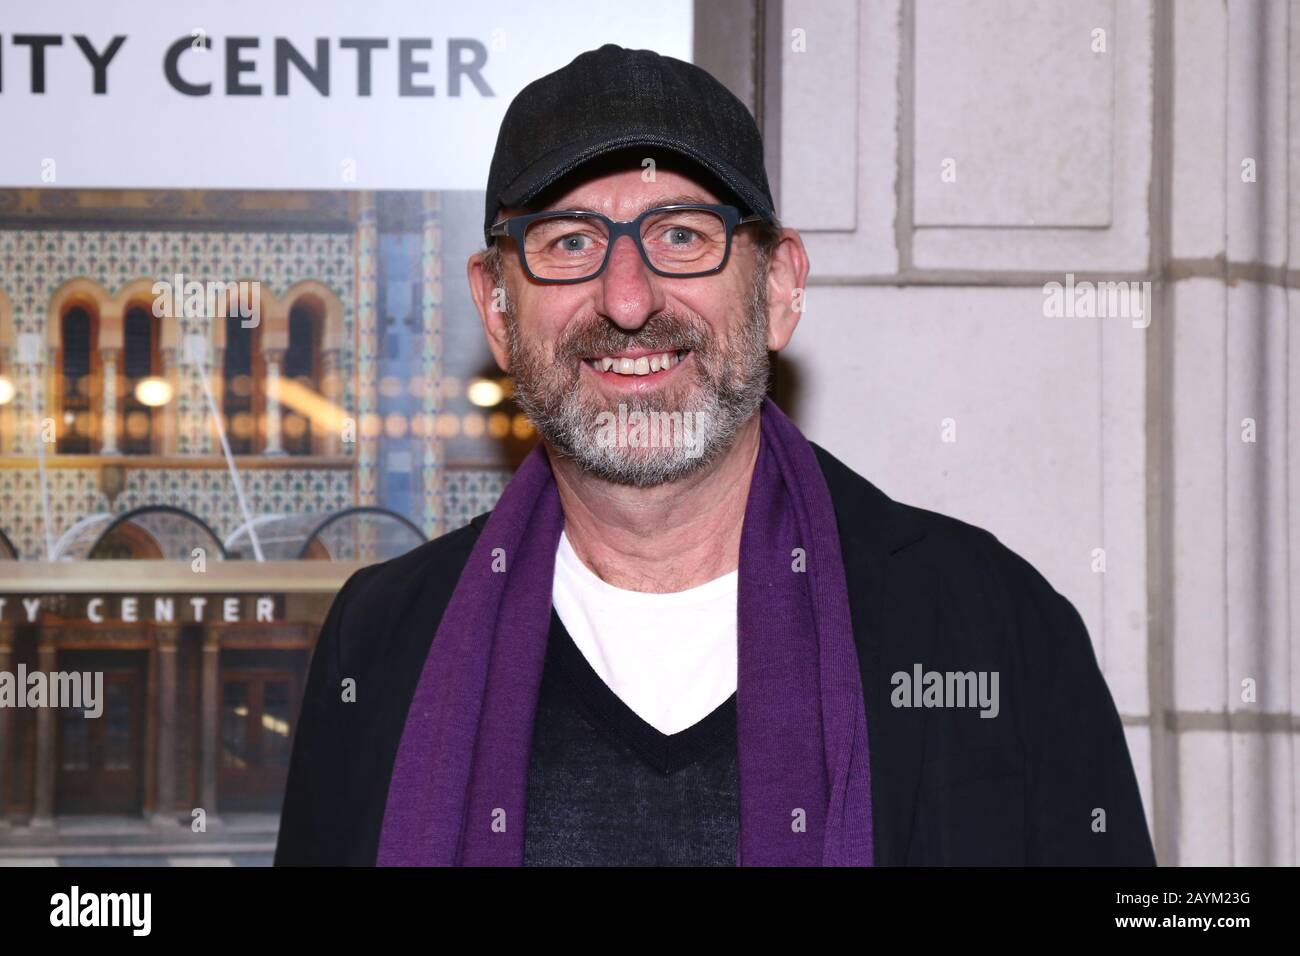 Opening night for My Name Is Lucy Barton at the Samuel J. Friedman Theatre - Arrivals. Featuring: David Cale Where: New York, New York, United States When: 16 Jan 2020 Credit: Joseph Marzullo/WENN.com Stock Photo